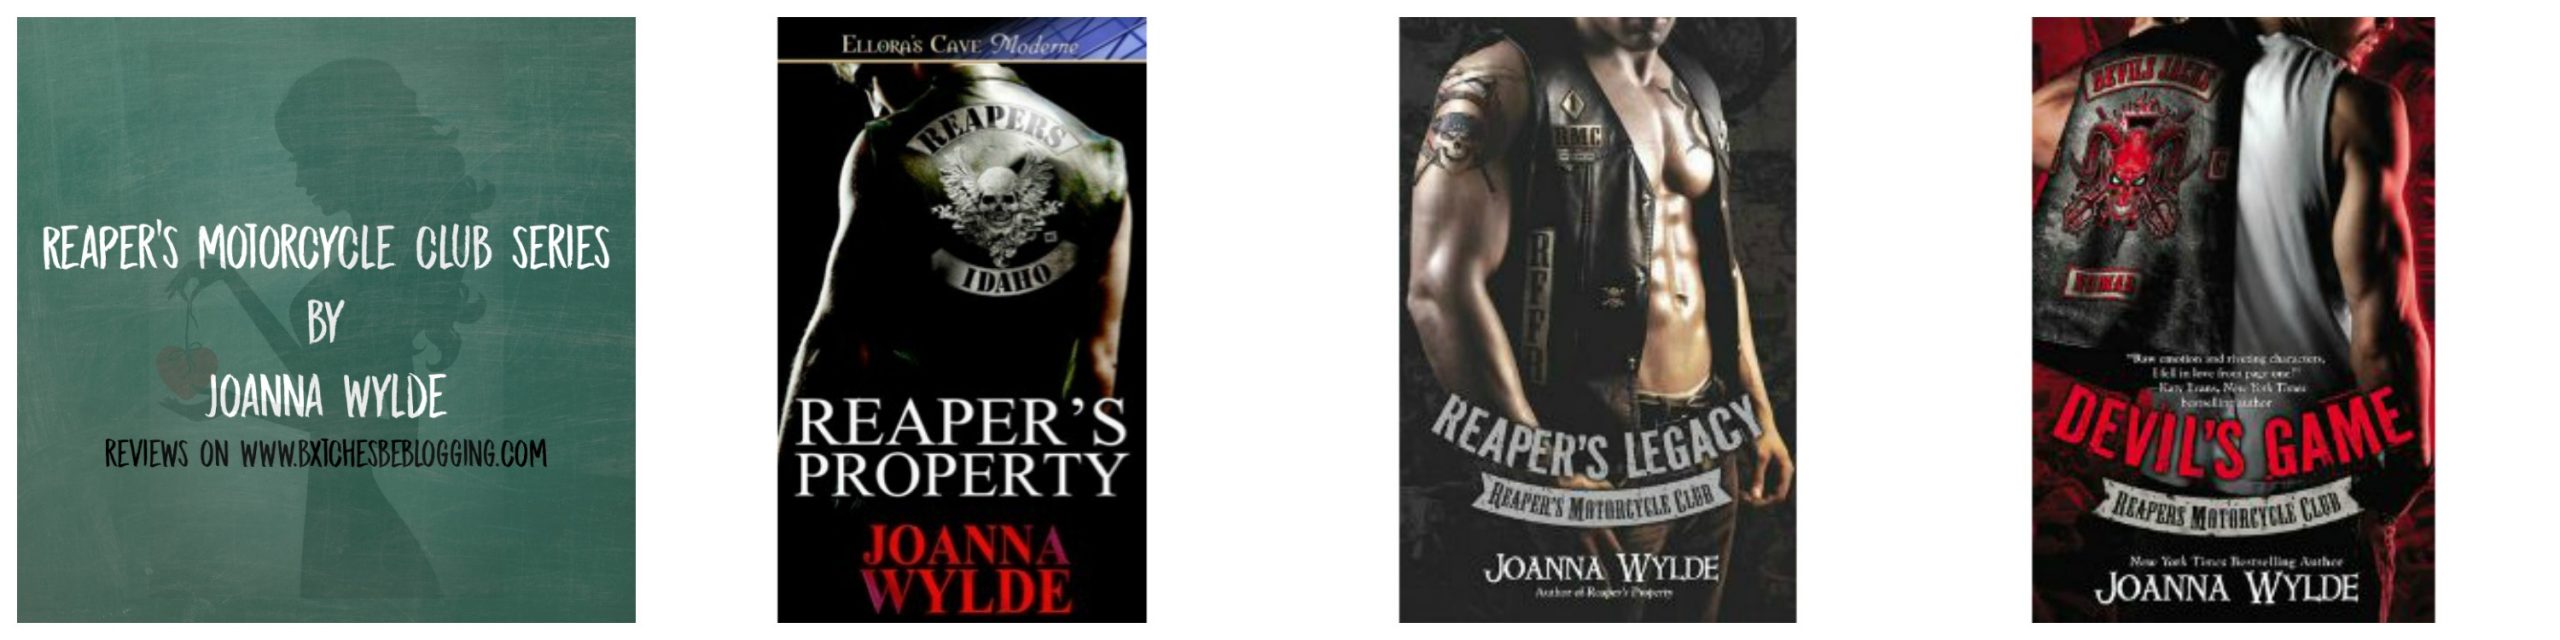 Reaper's Motorcycle Club Series by Joanna Wylde | Reviews on www.bxtchesbeblogging.com